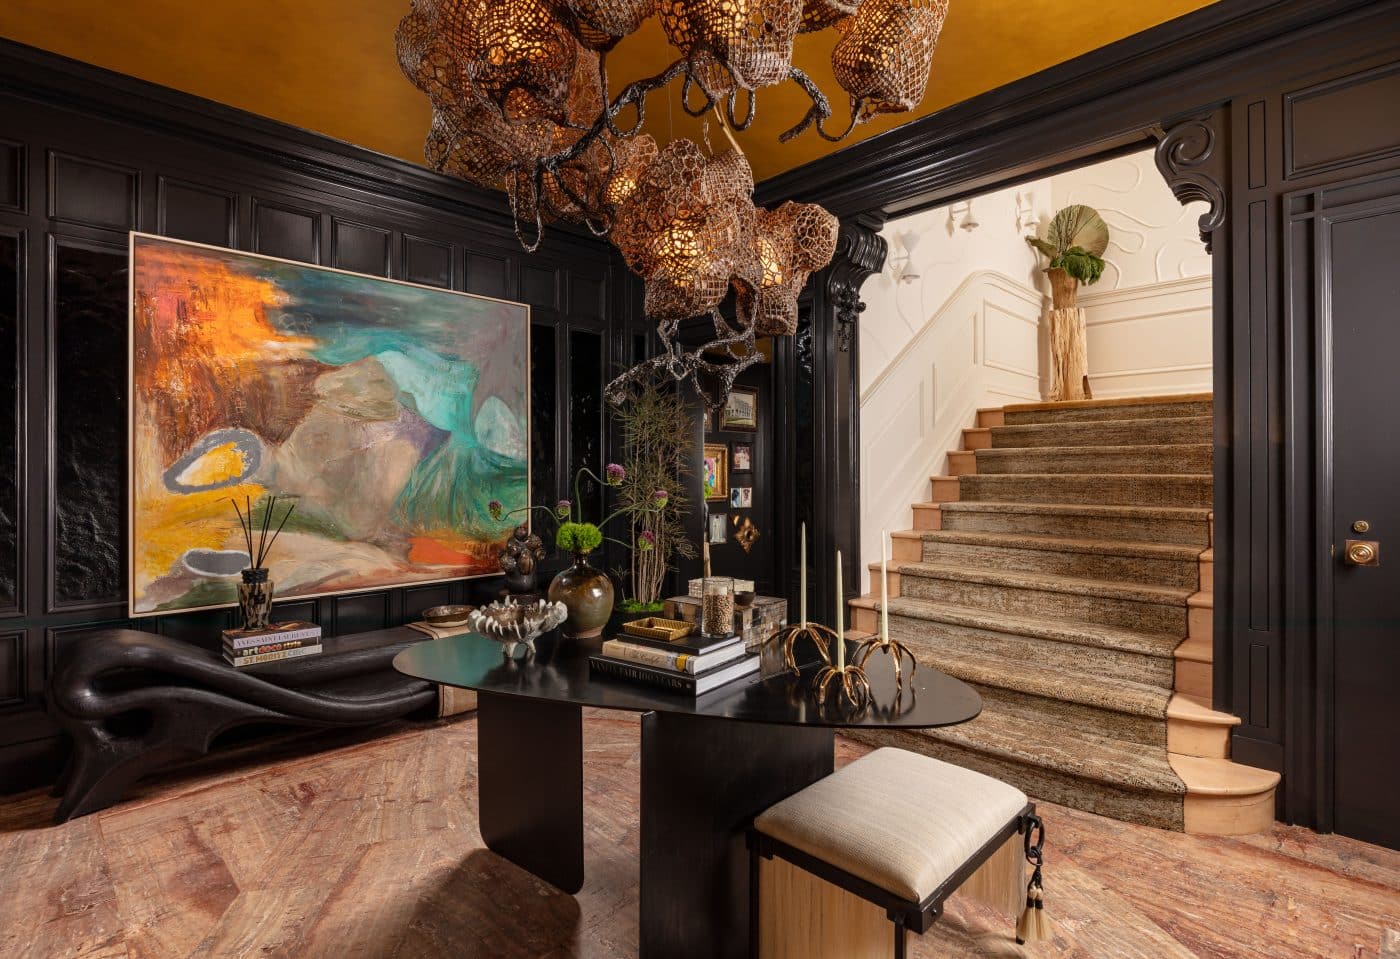 Kips Bay Decorator Show House foyer by Yellow House Architects